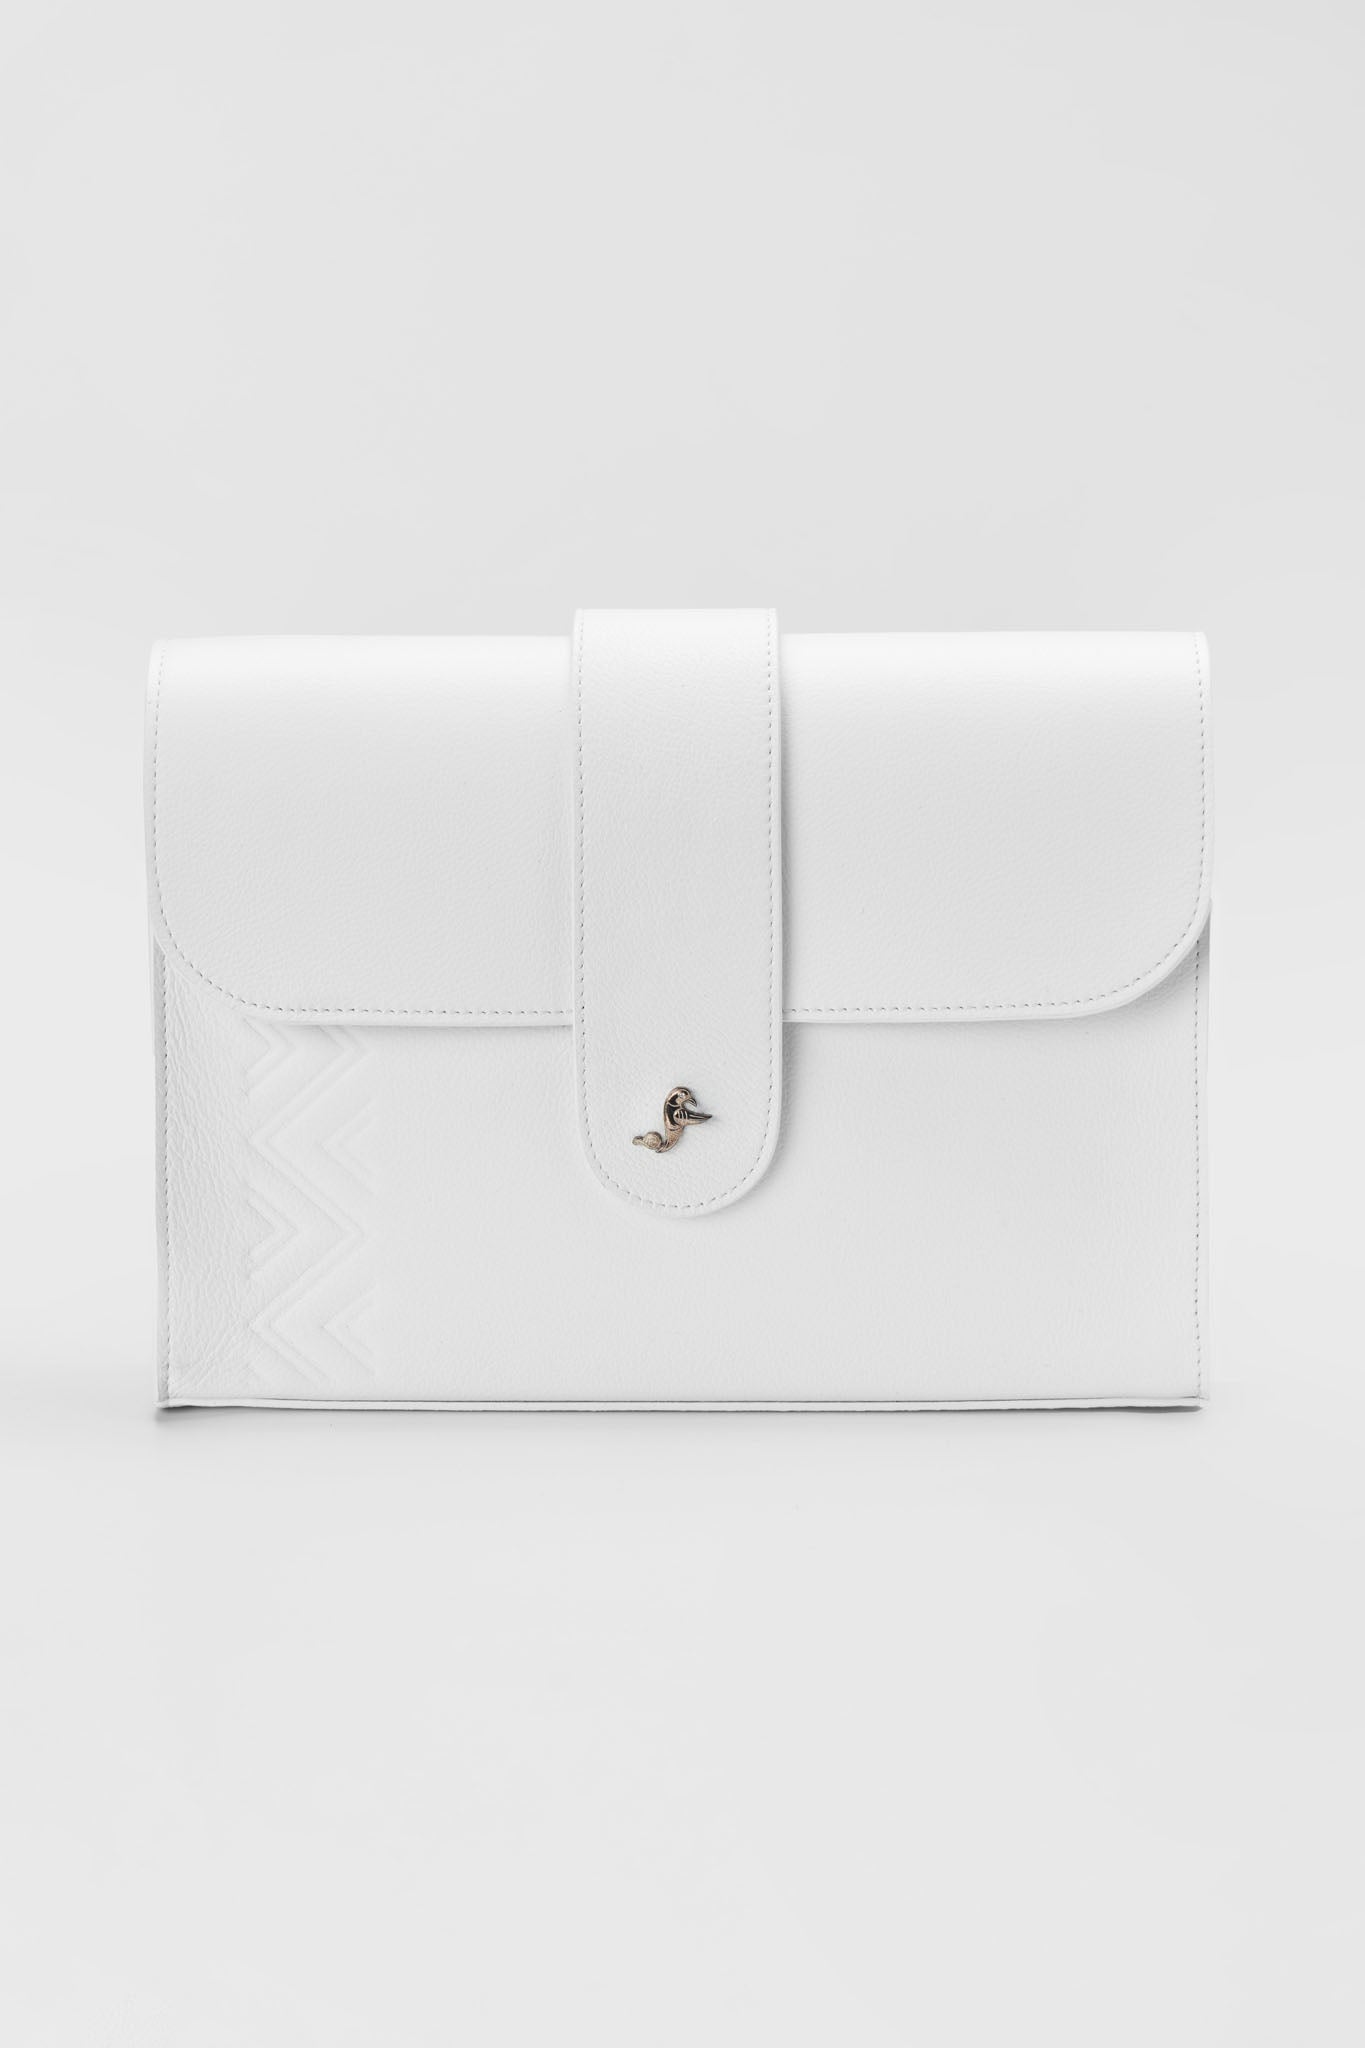 Kars leather clutch in white